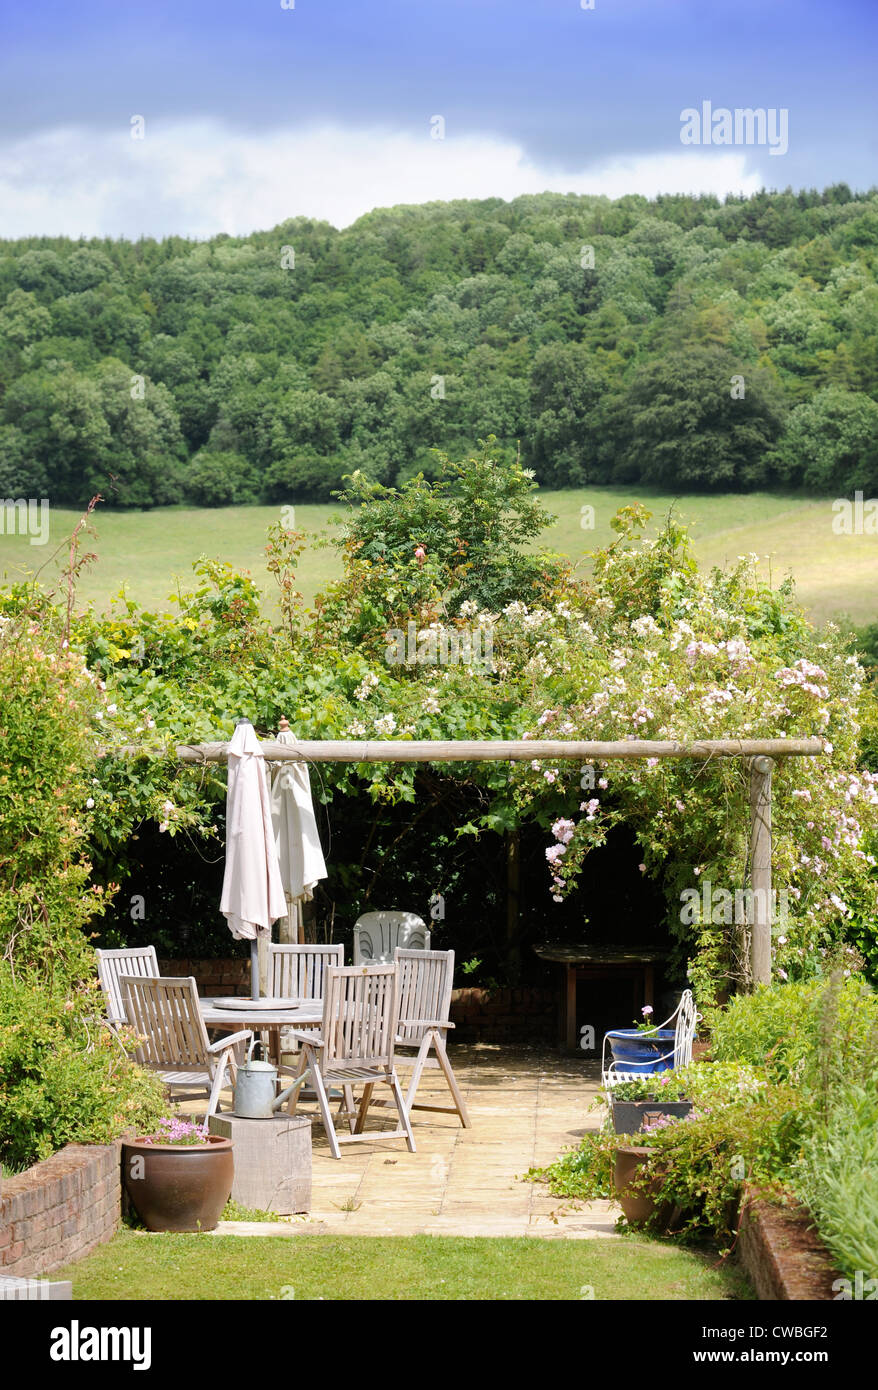 A garden patio table and chairs beneath an arbor in a countryside setting England UK Stock Photo